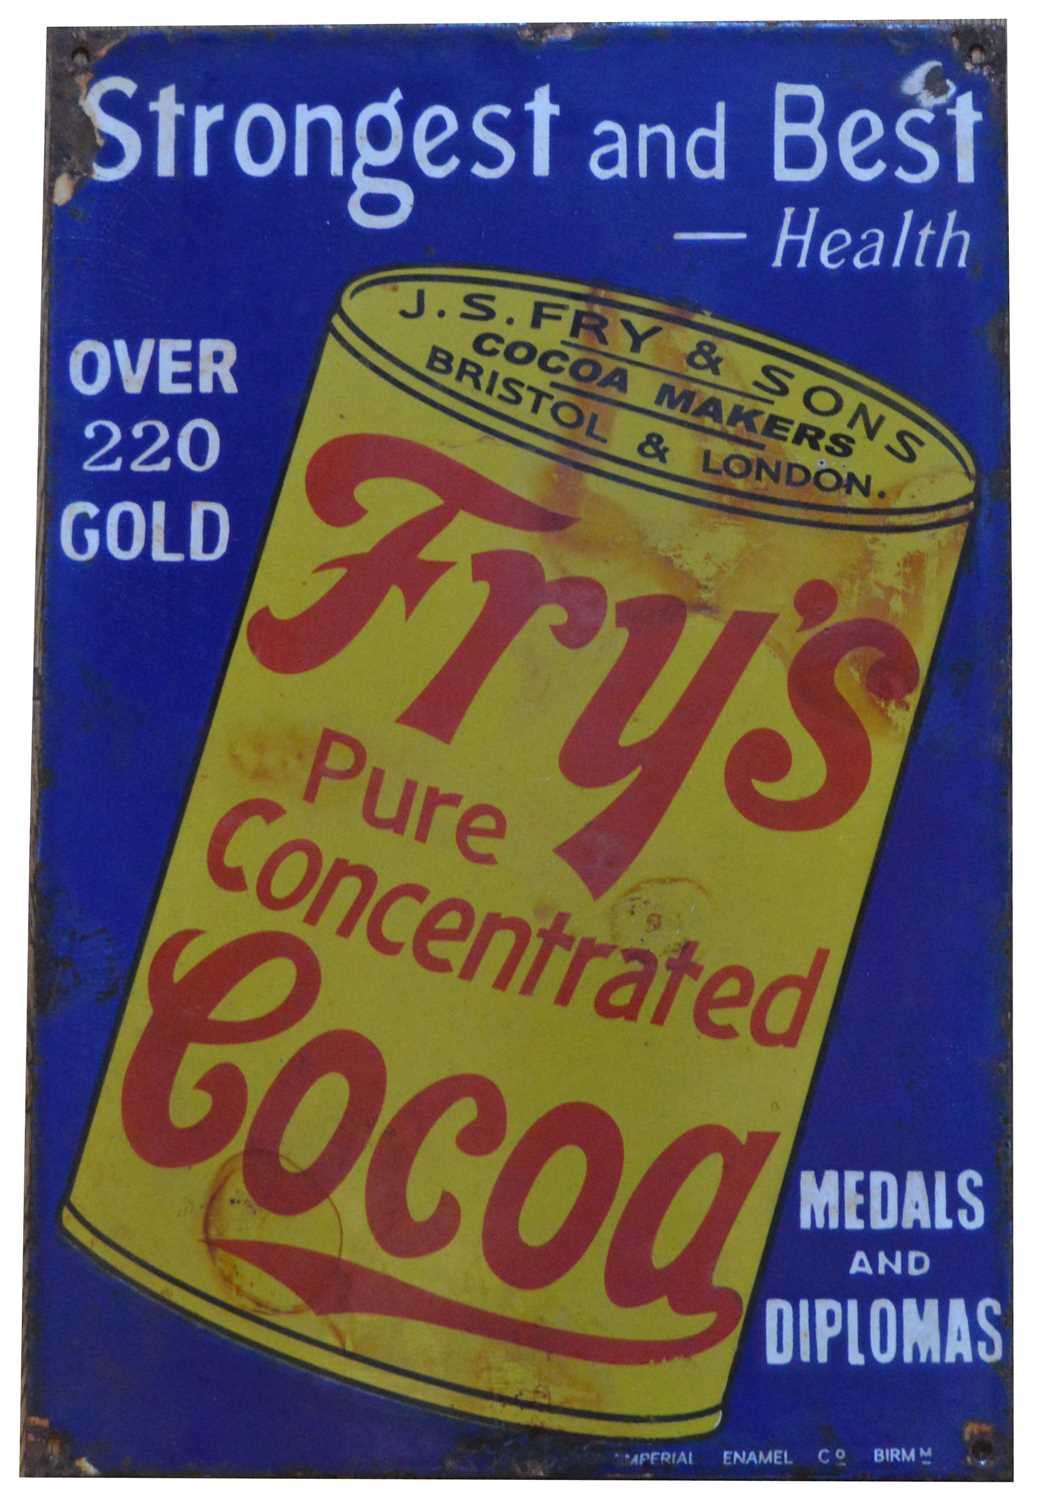 Lot 720 - Fry's Pure Concentrated Cocoa enamel advertising sign